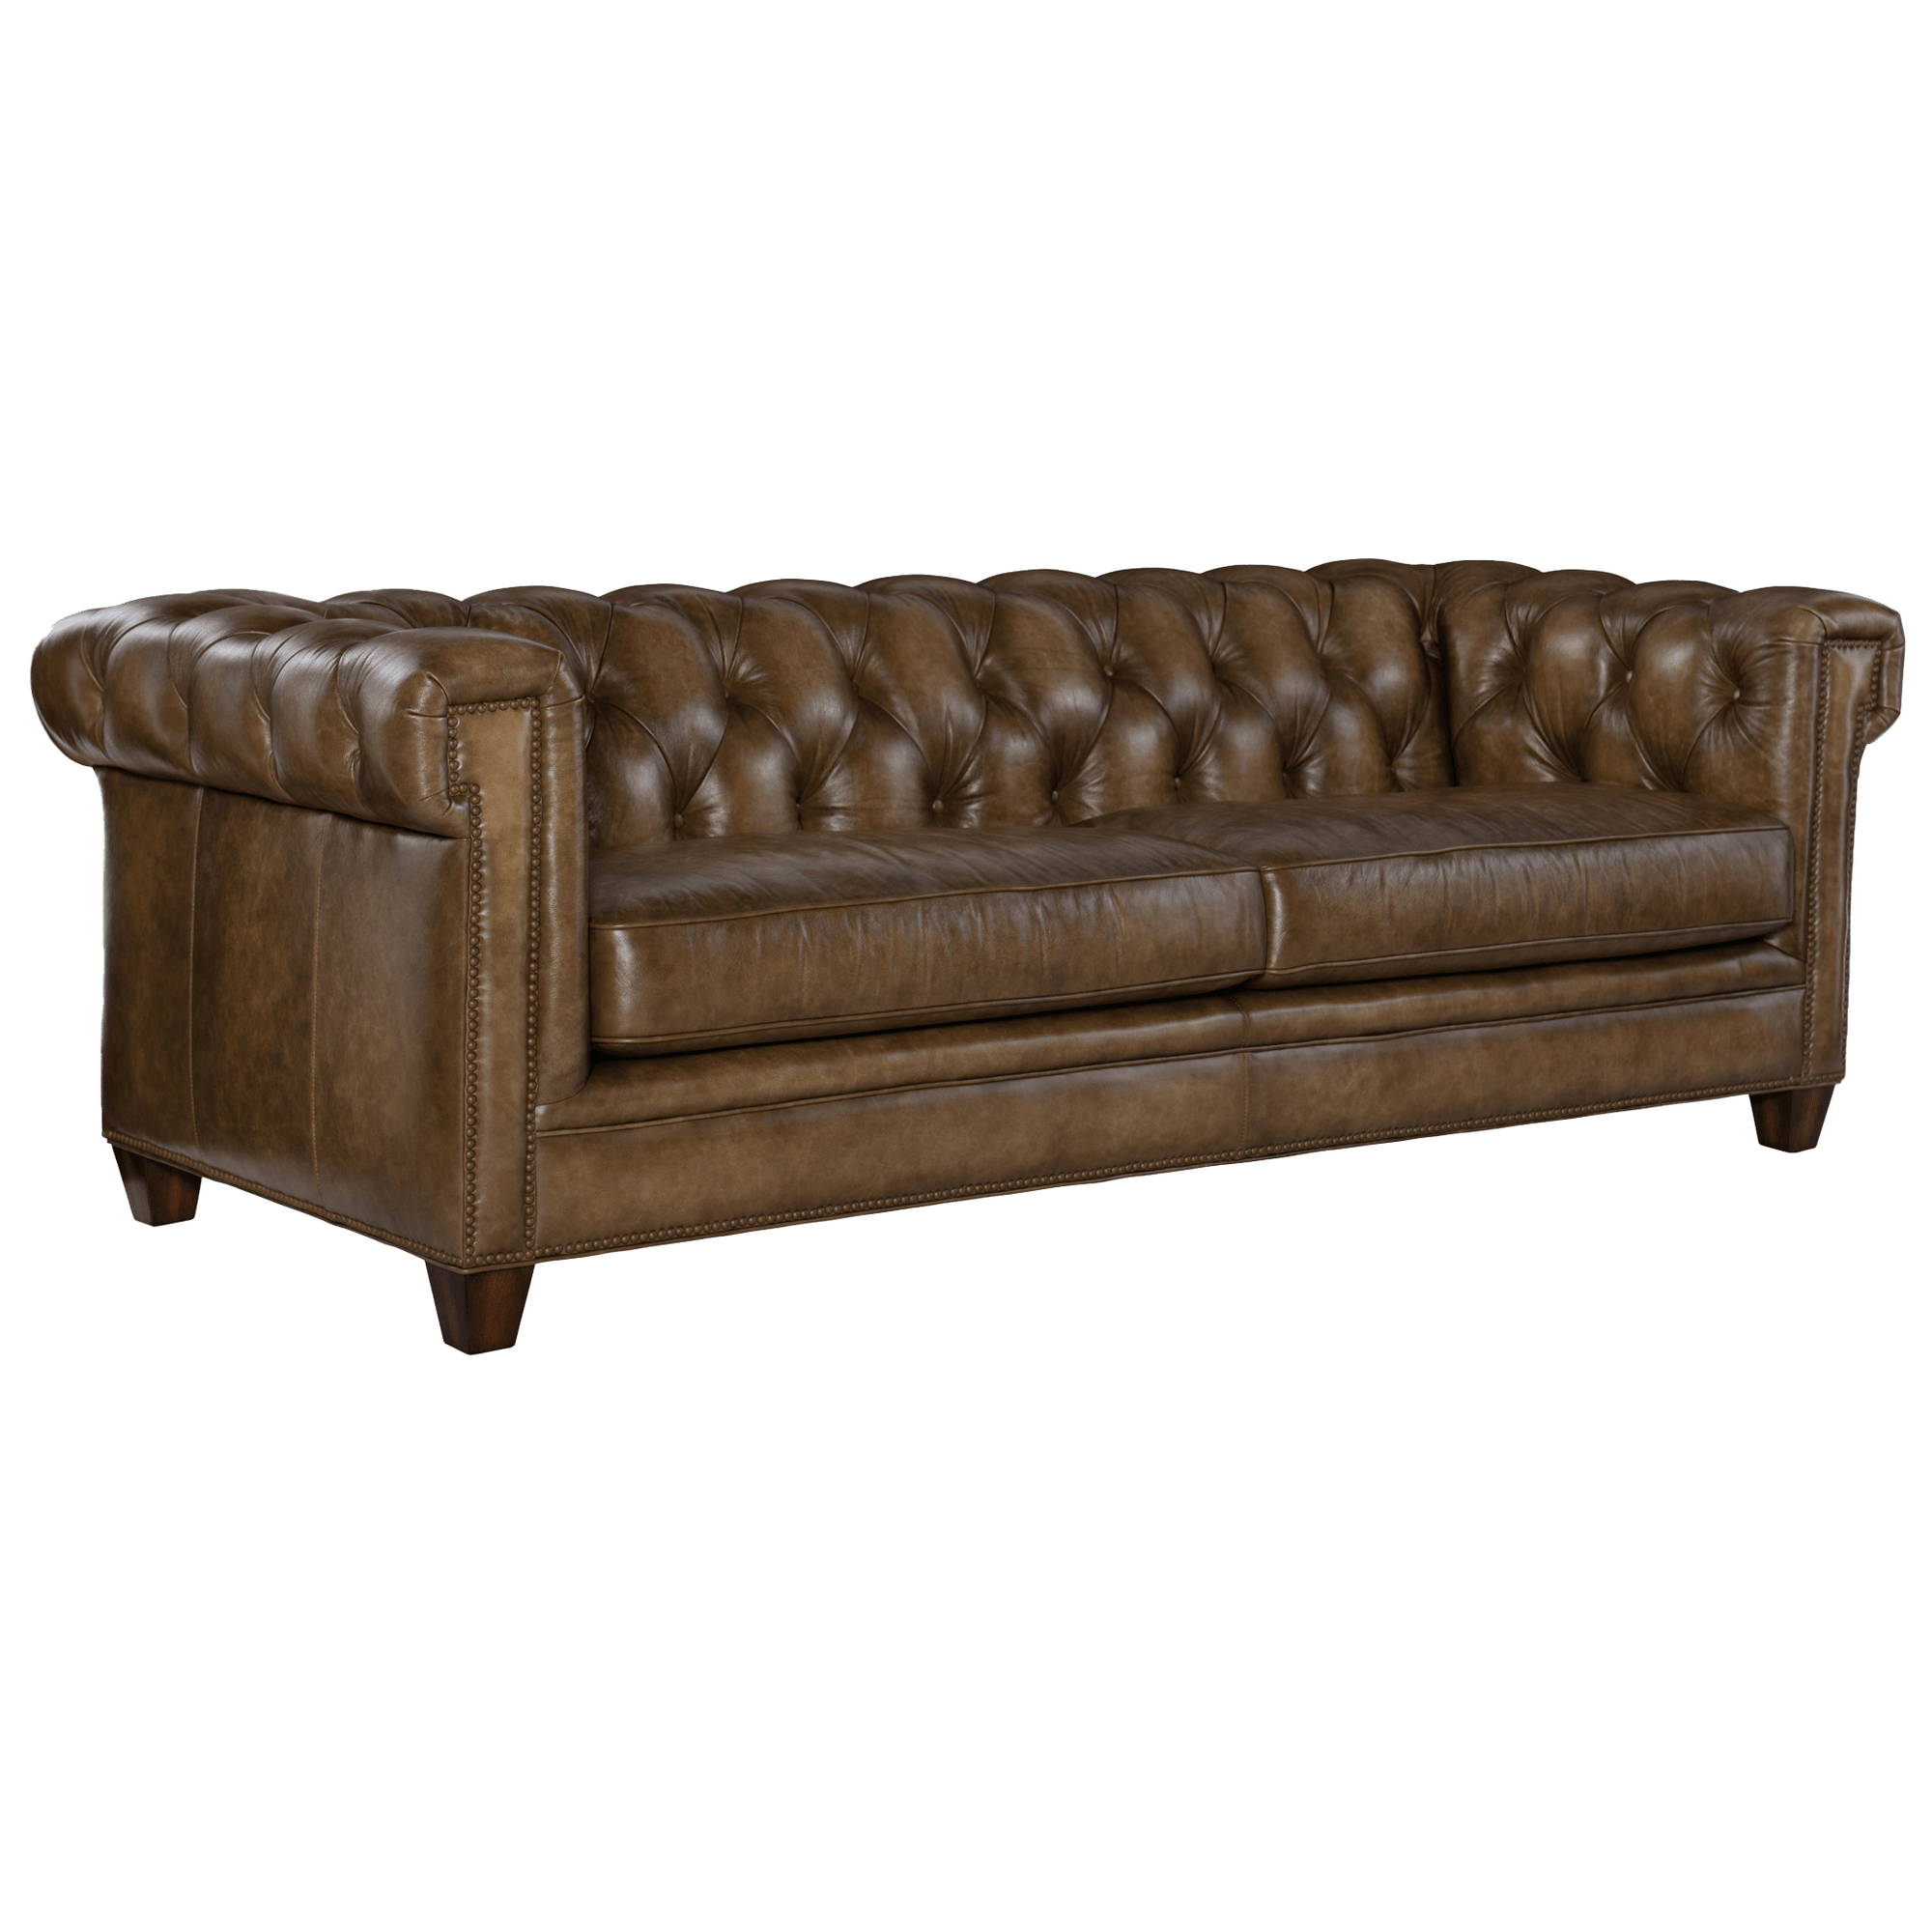 Caysie 94.5" Wide Upholstered Leather Sofa, Brown - Coja